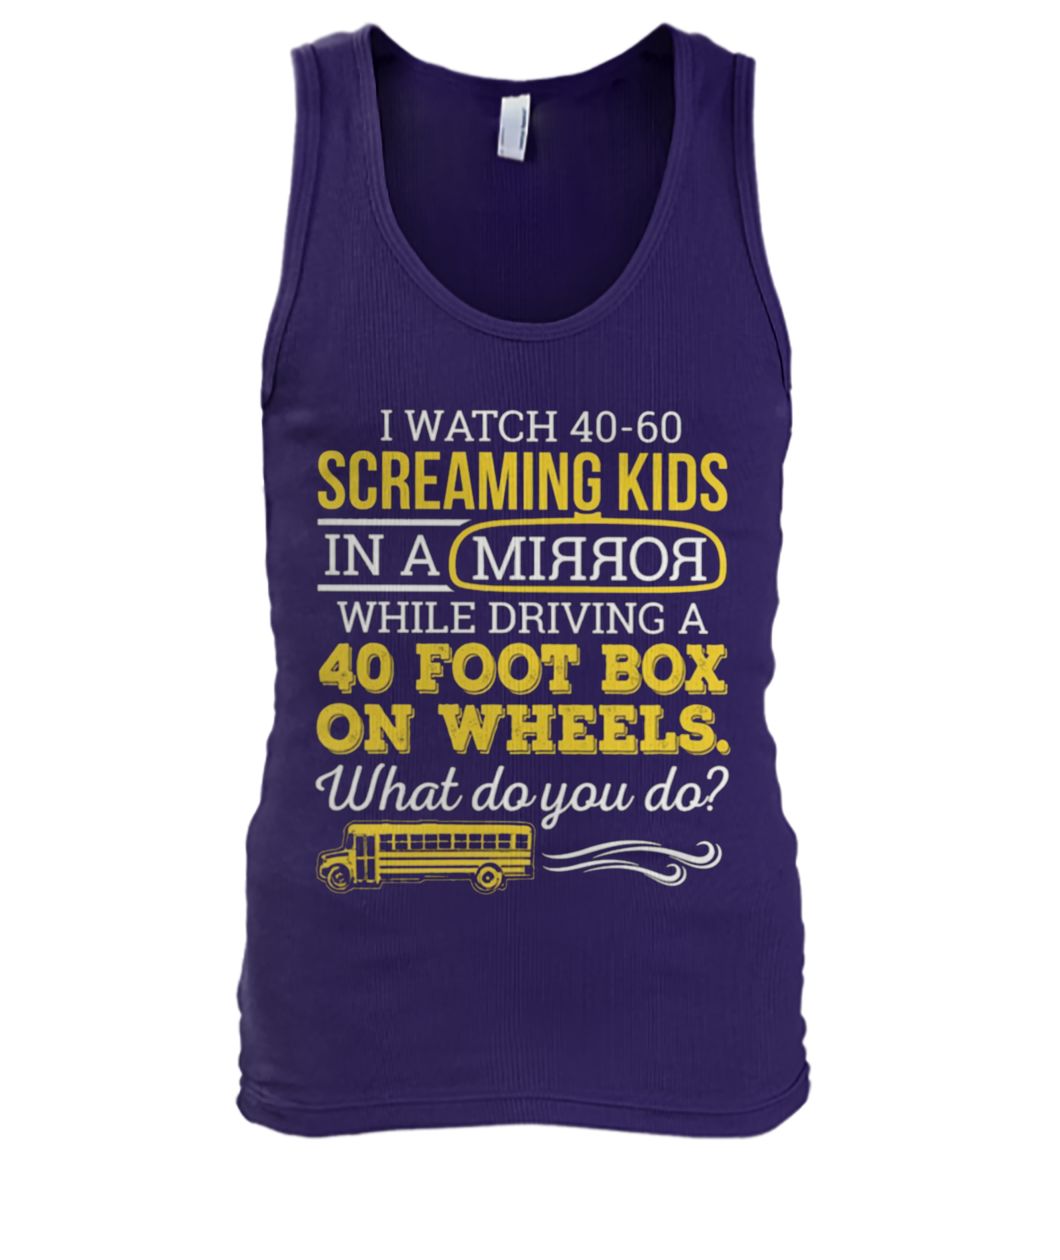 Bus driver I watch 40-60 screaming kids in a mirror while driving a 40 foot box on wheels men's tank top